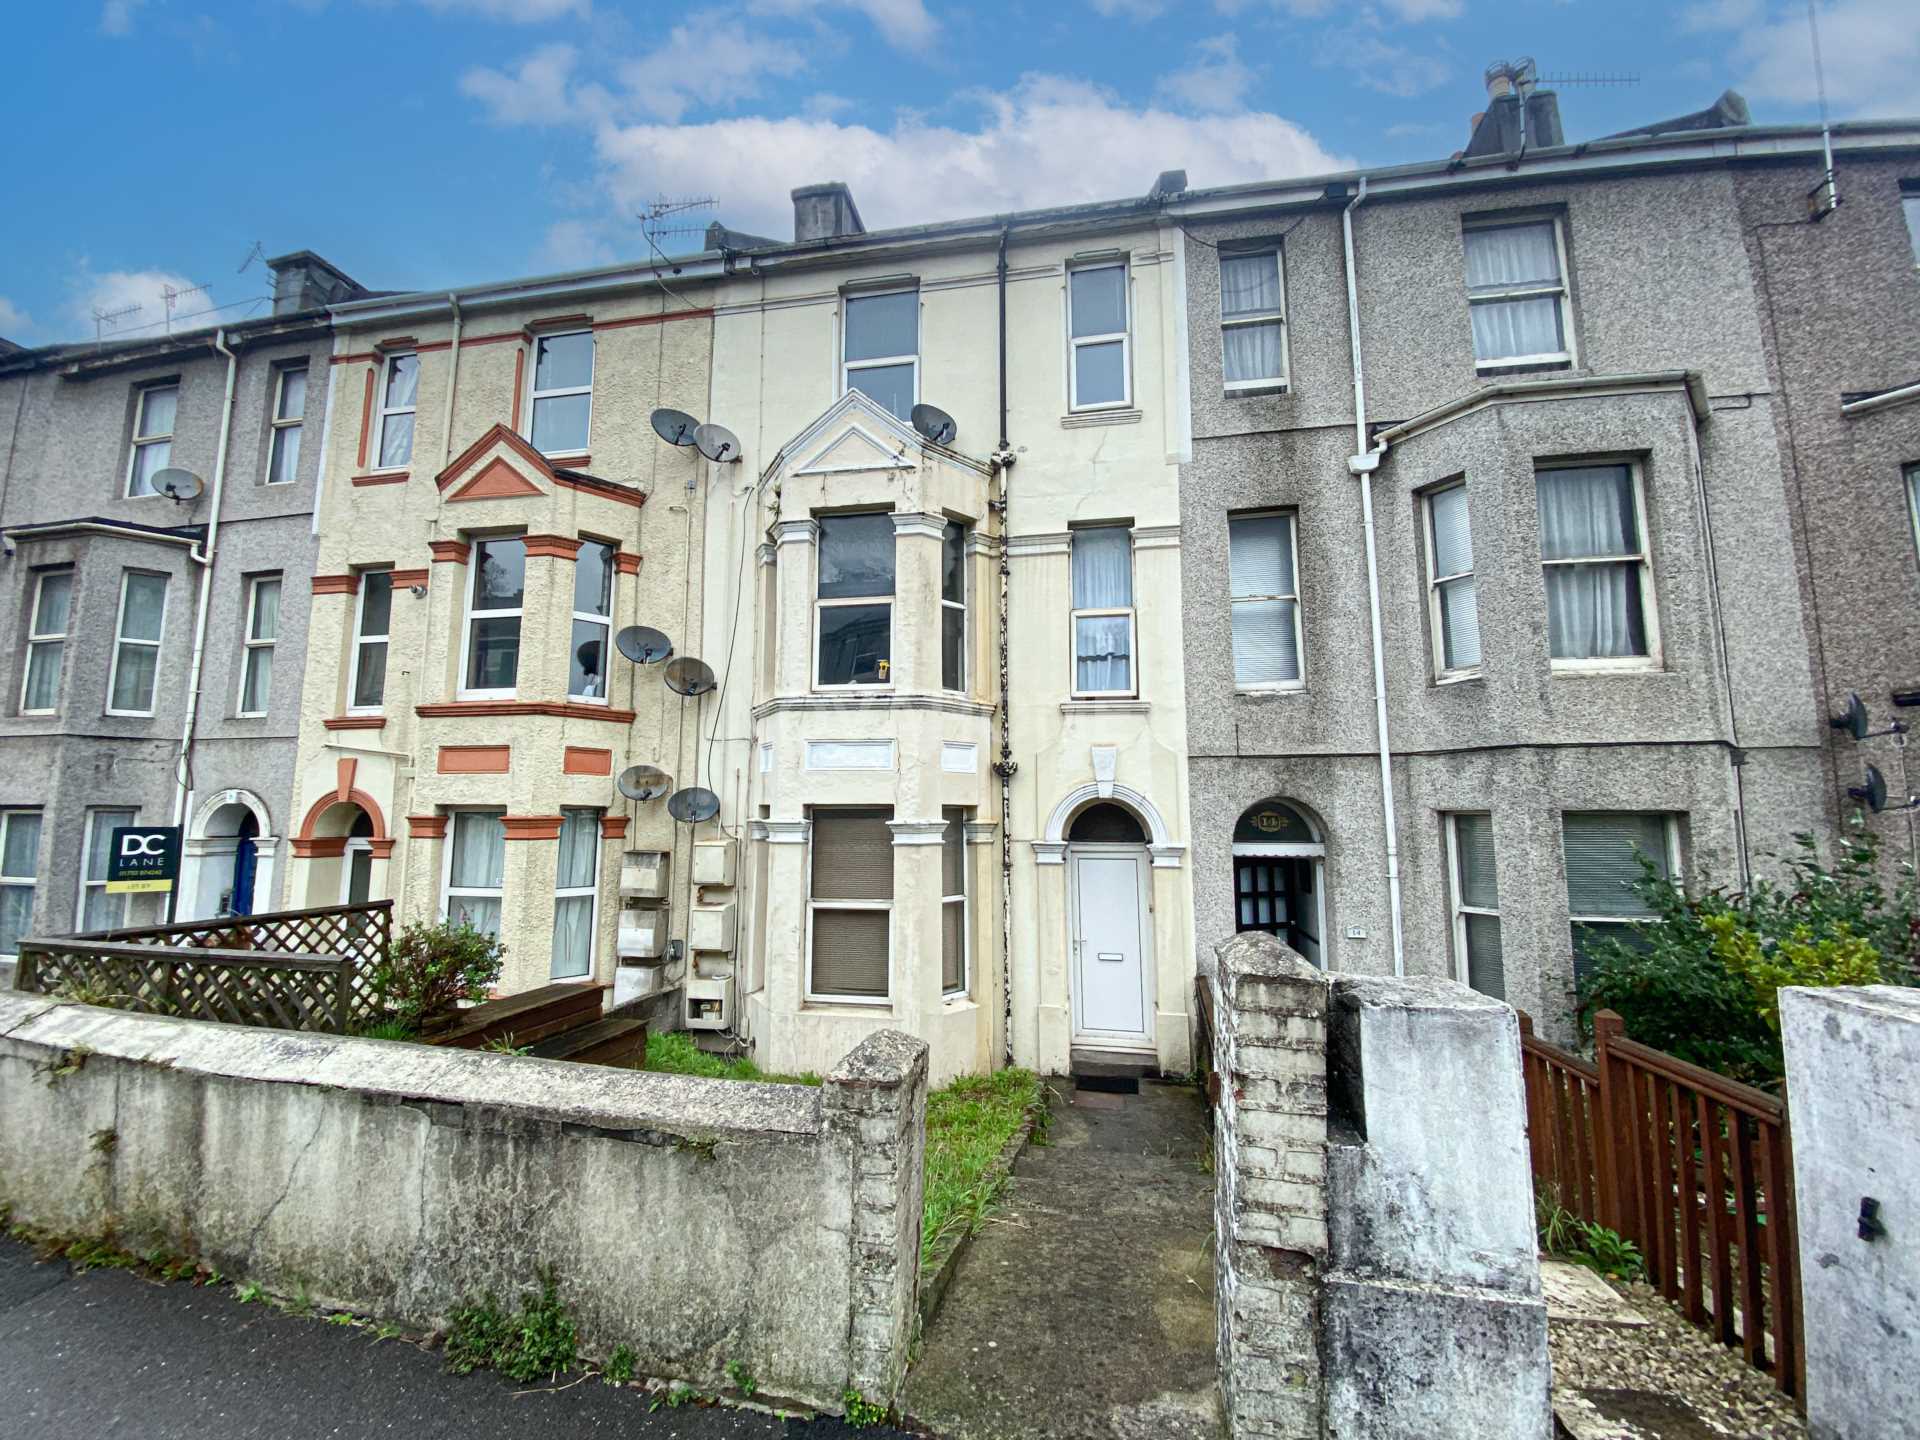 Percy Terrace, Mutley, PL4 7HG, Image 1